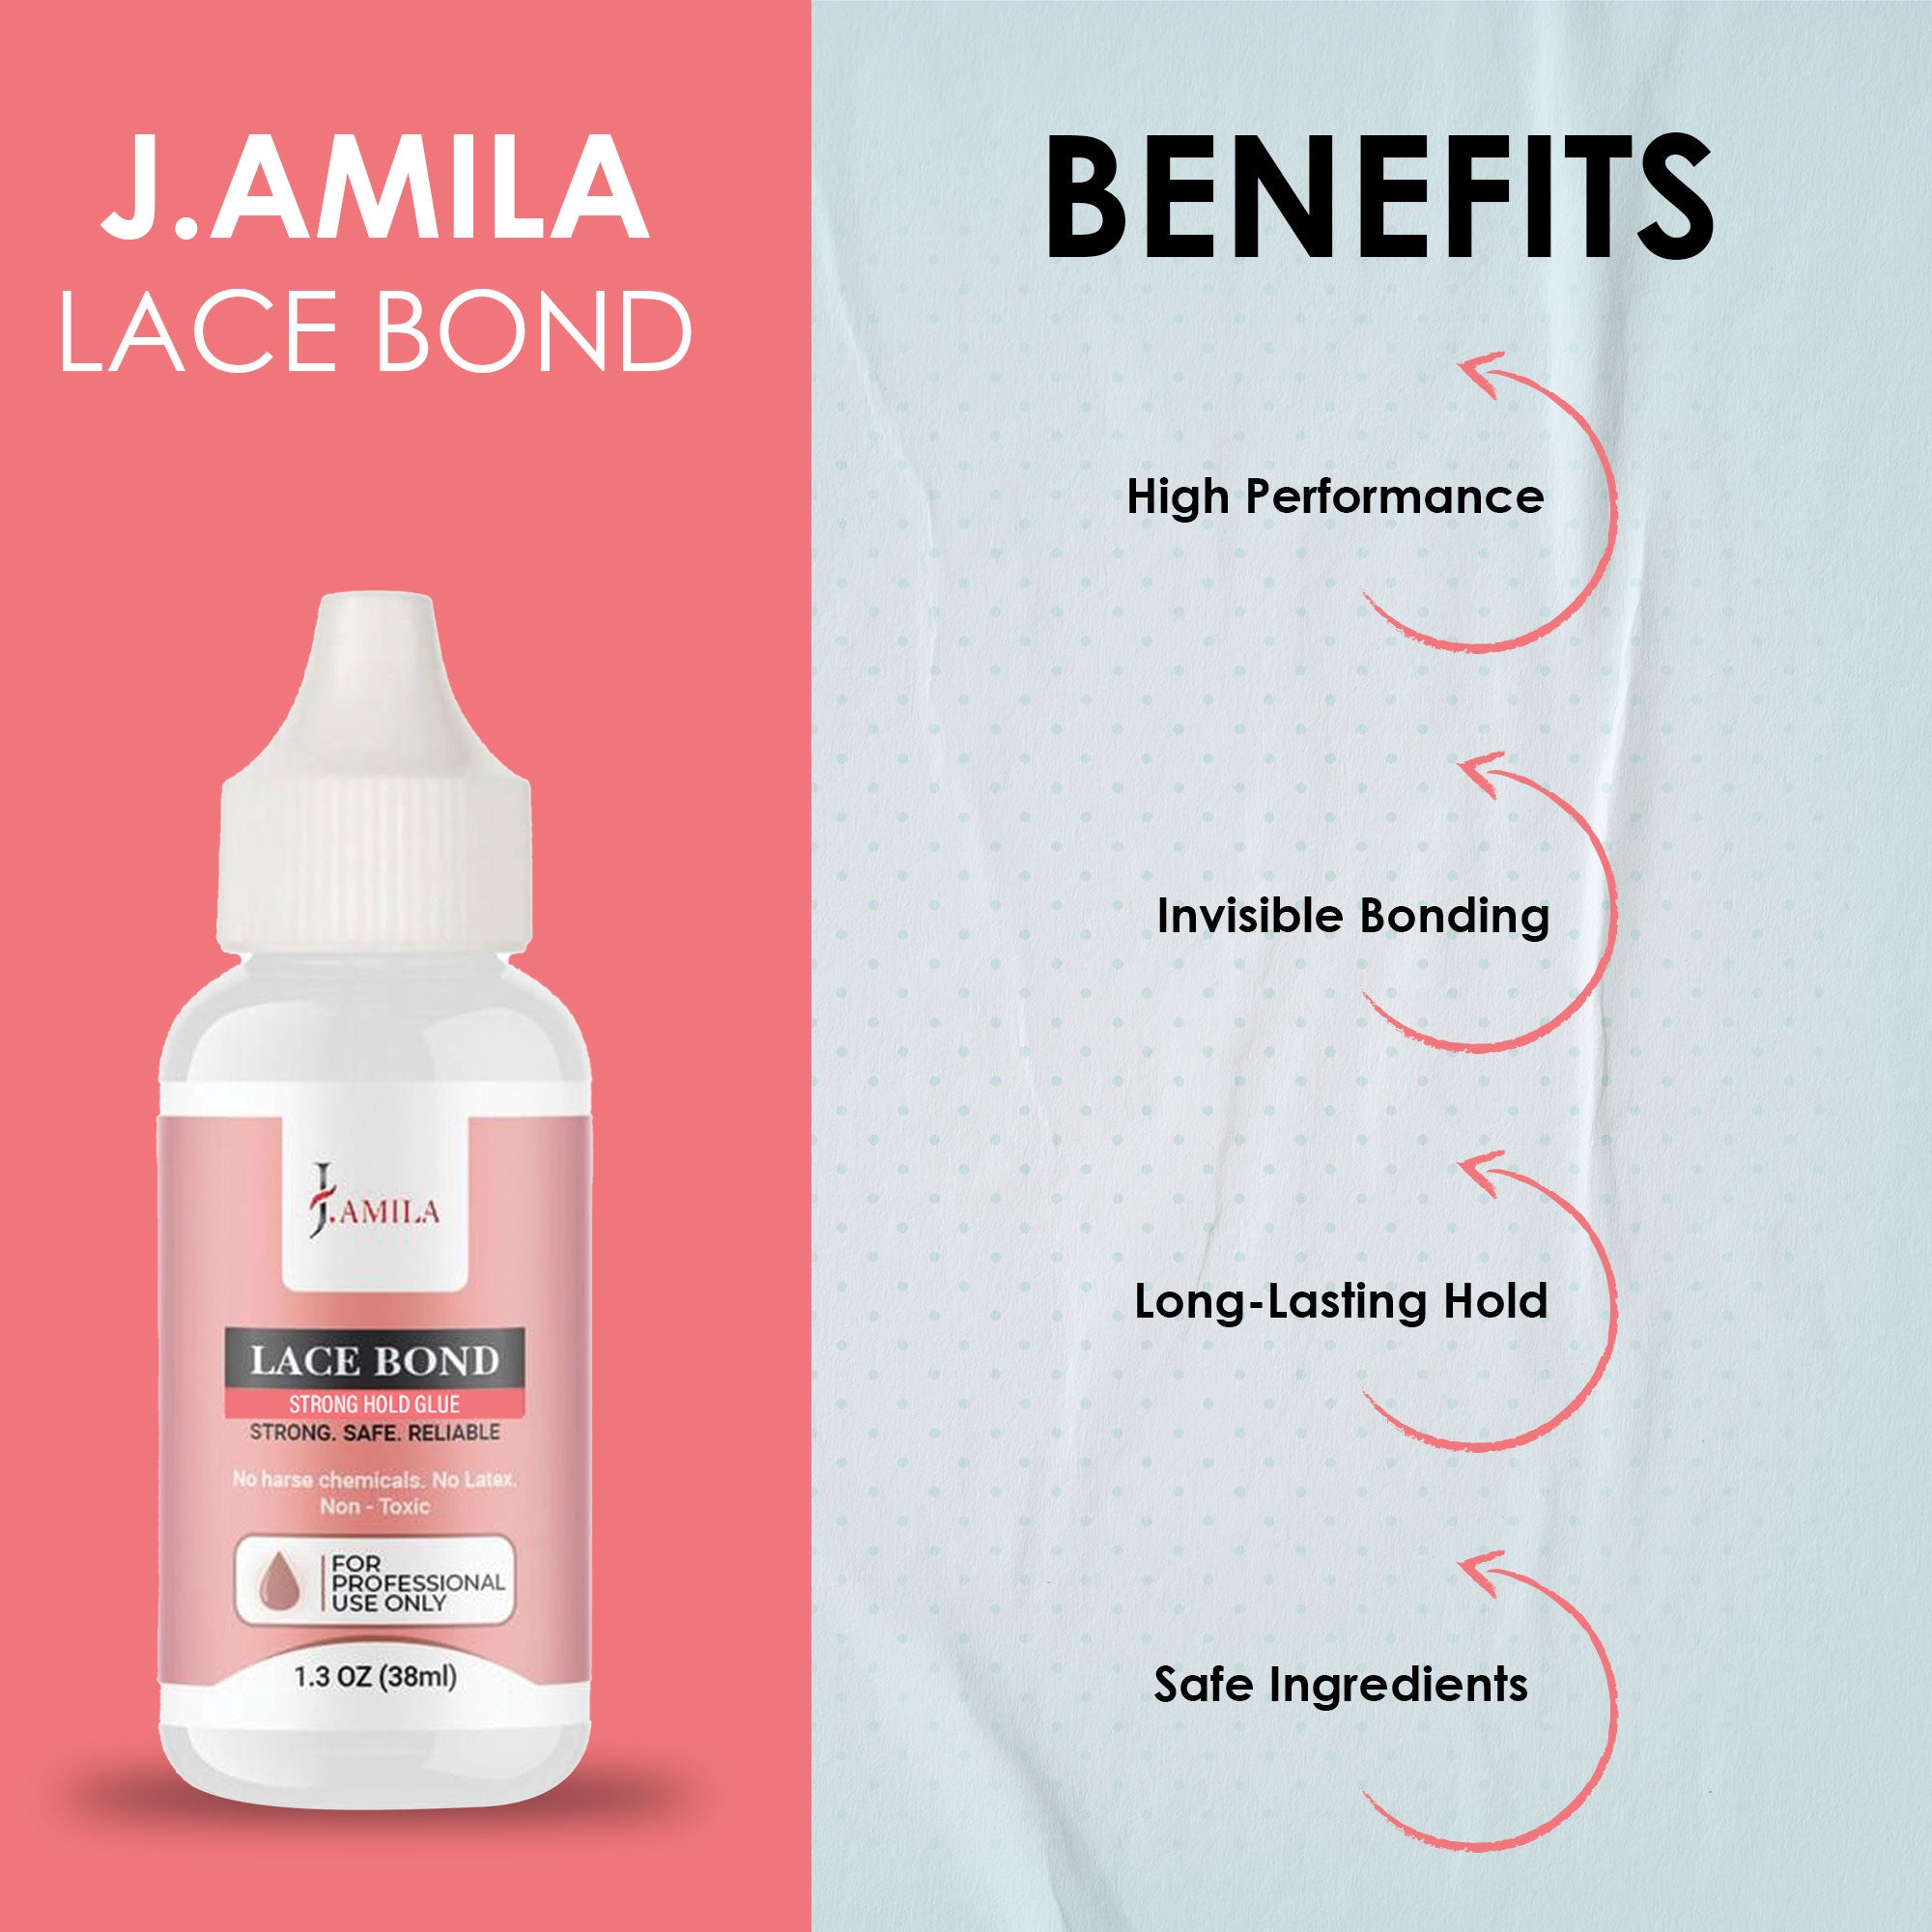 J. AMILA Professional Lace Bond Strong, Safe, Reliable Hair Adhesive Water and Oil Resistant for Invisible Wig Bonding 1.3 oz 38ml